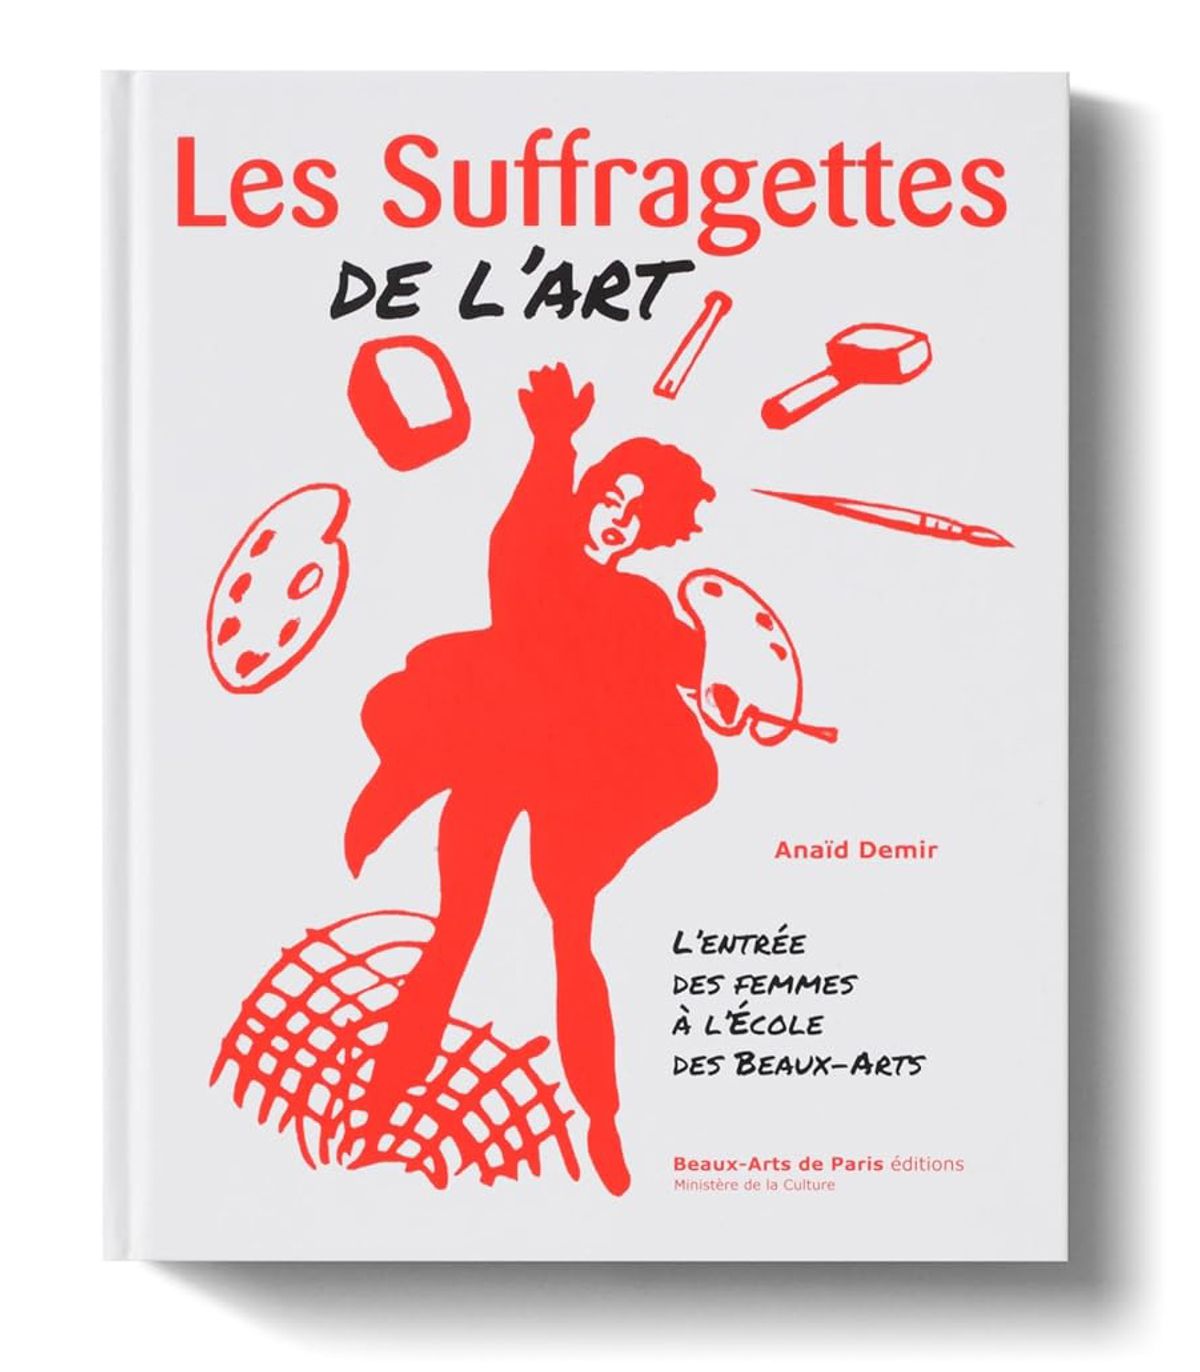 The new version of the book is reportedly missing the sections “#MeToo years” and “A charter for gender equality”

Photo: Beaux-Arts de Paris